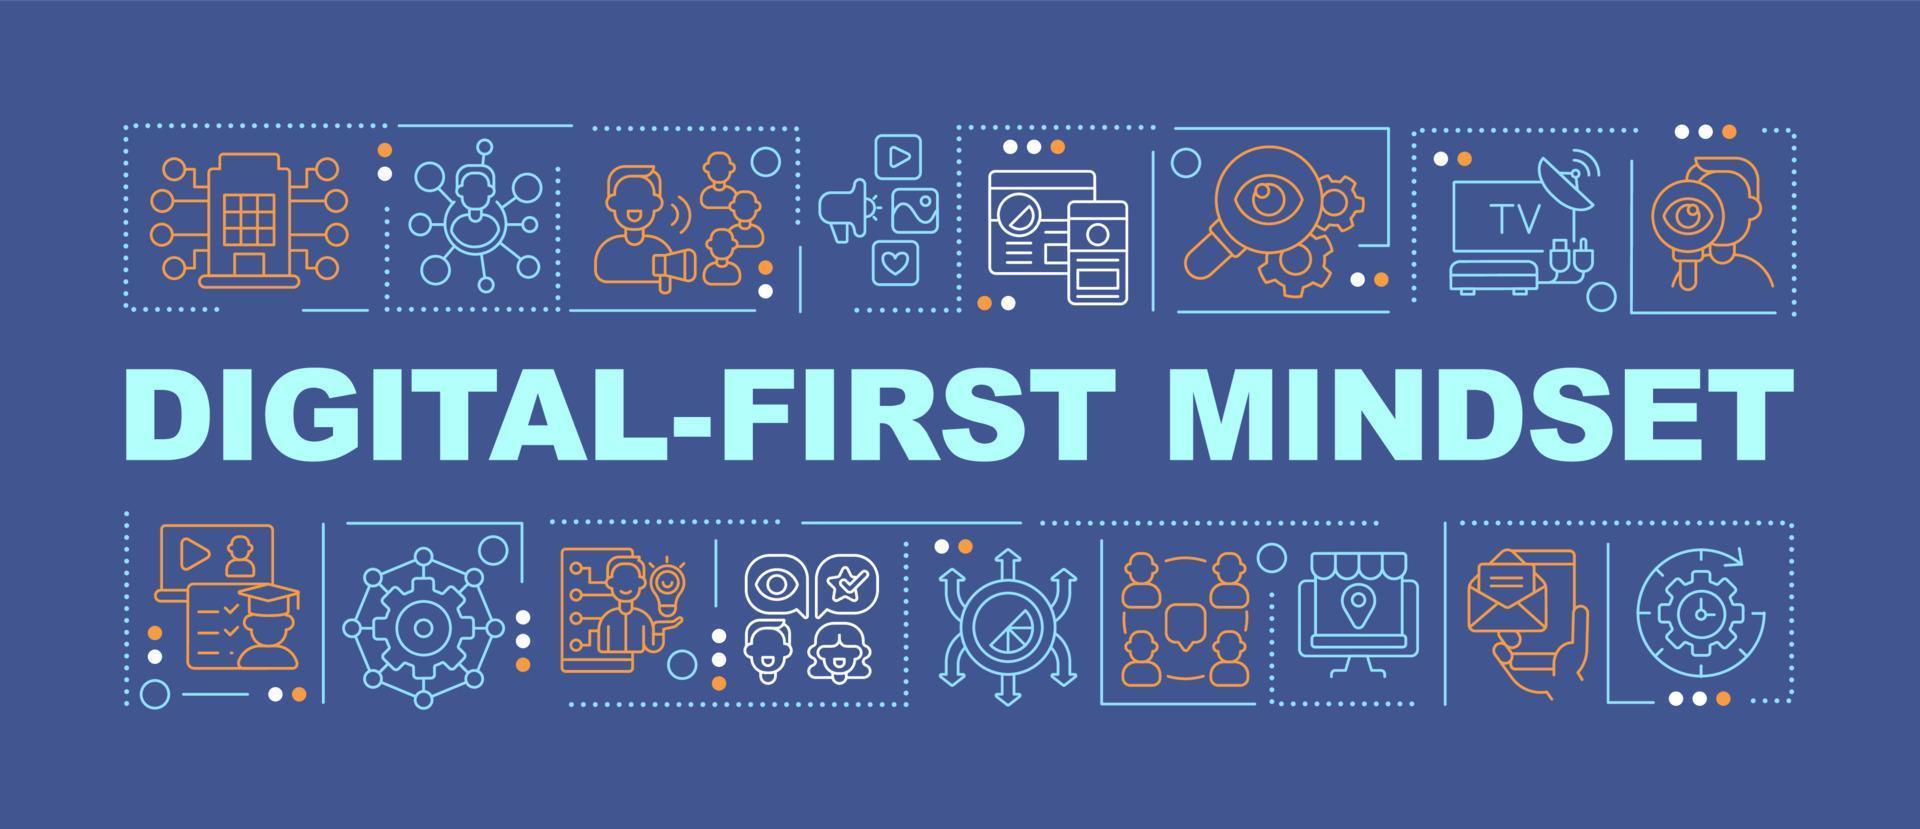 Digital first mindset word concepts dark blue banner. Electronic commerce. Infographics with icons on color background. Isolated typography. Vector illustration with text.